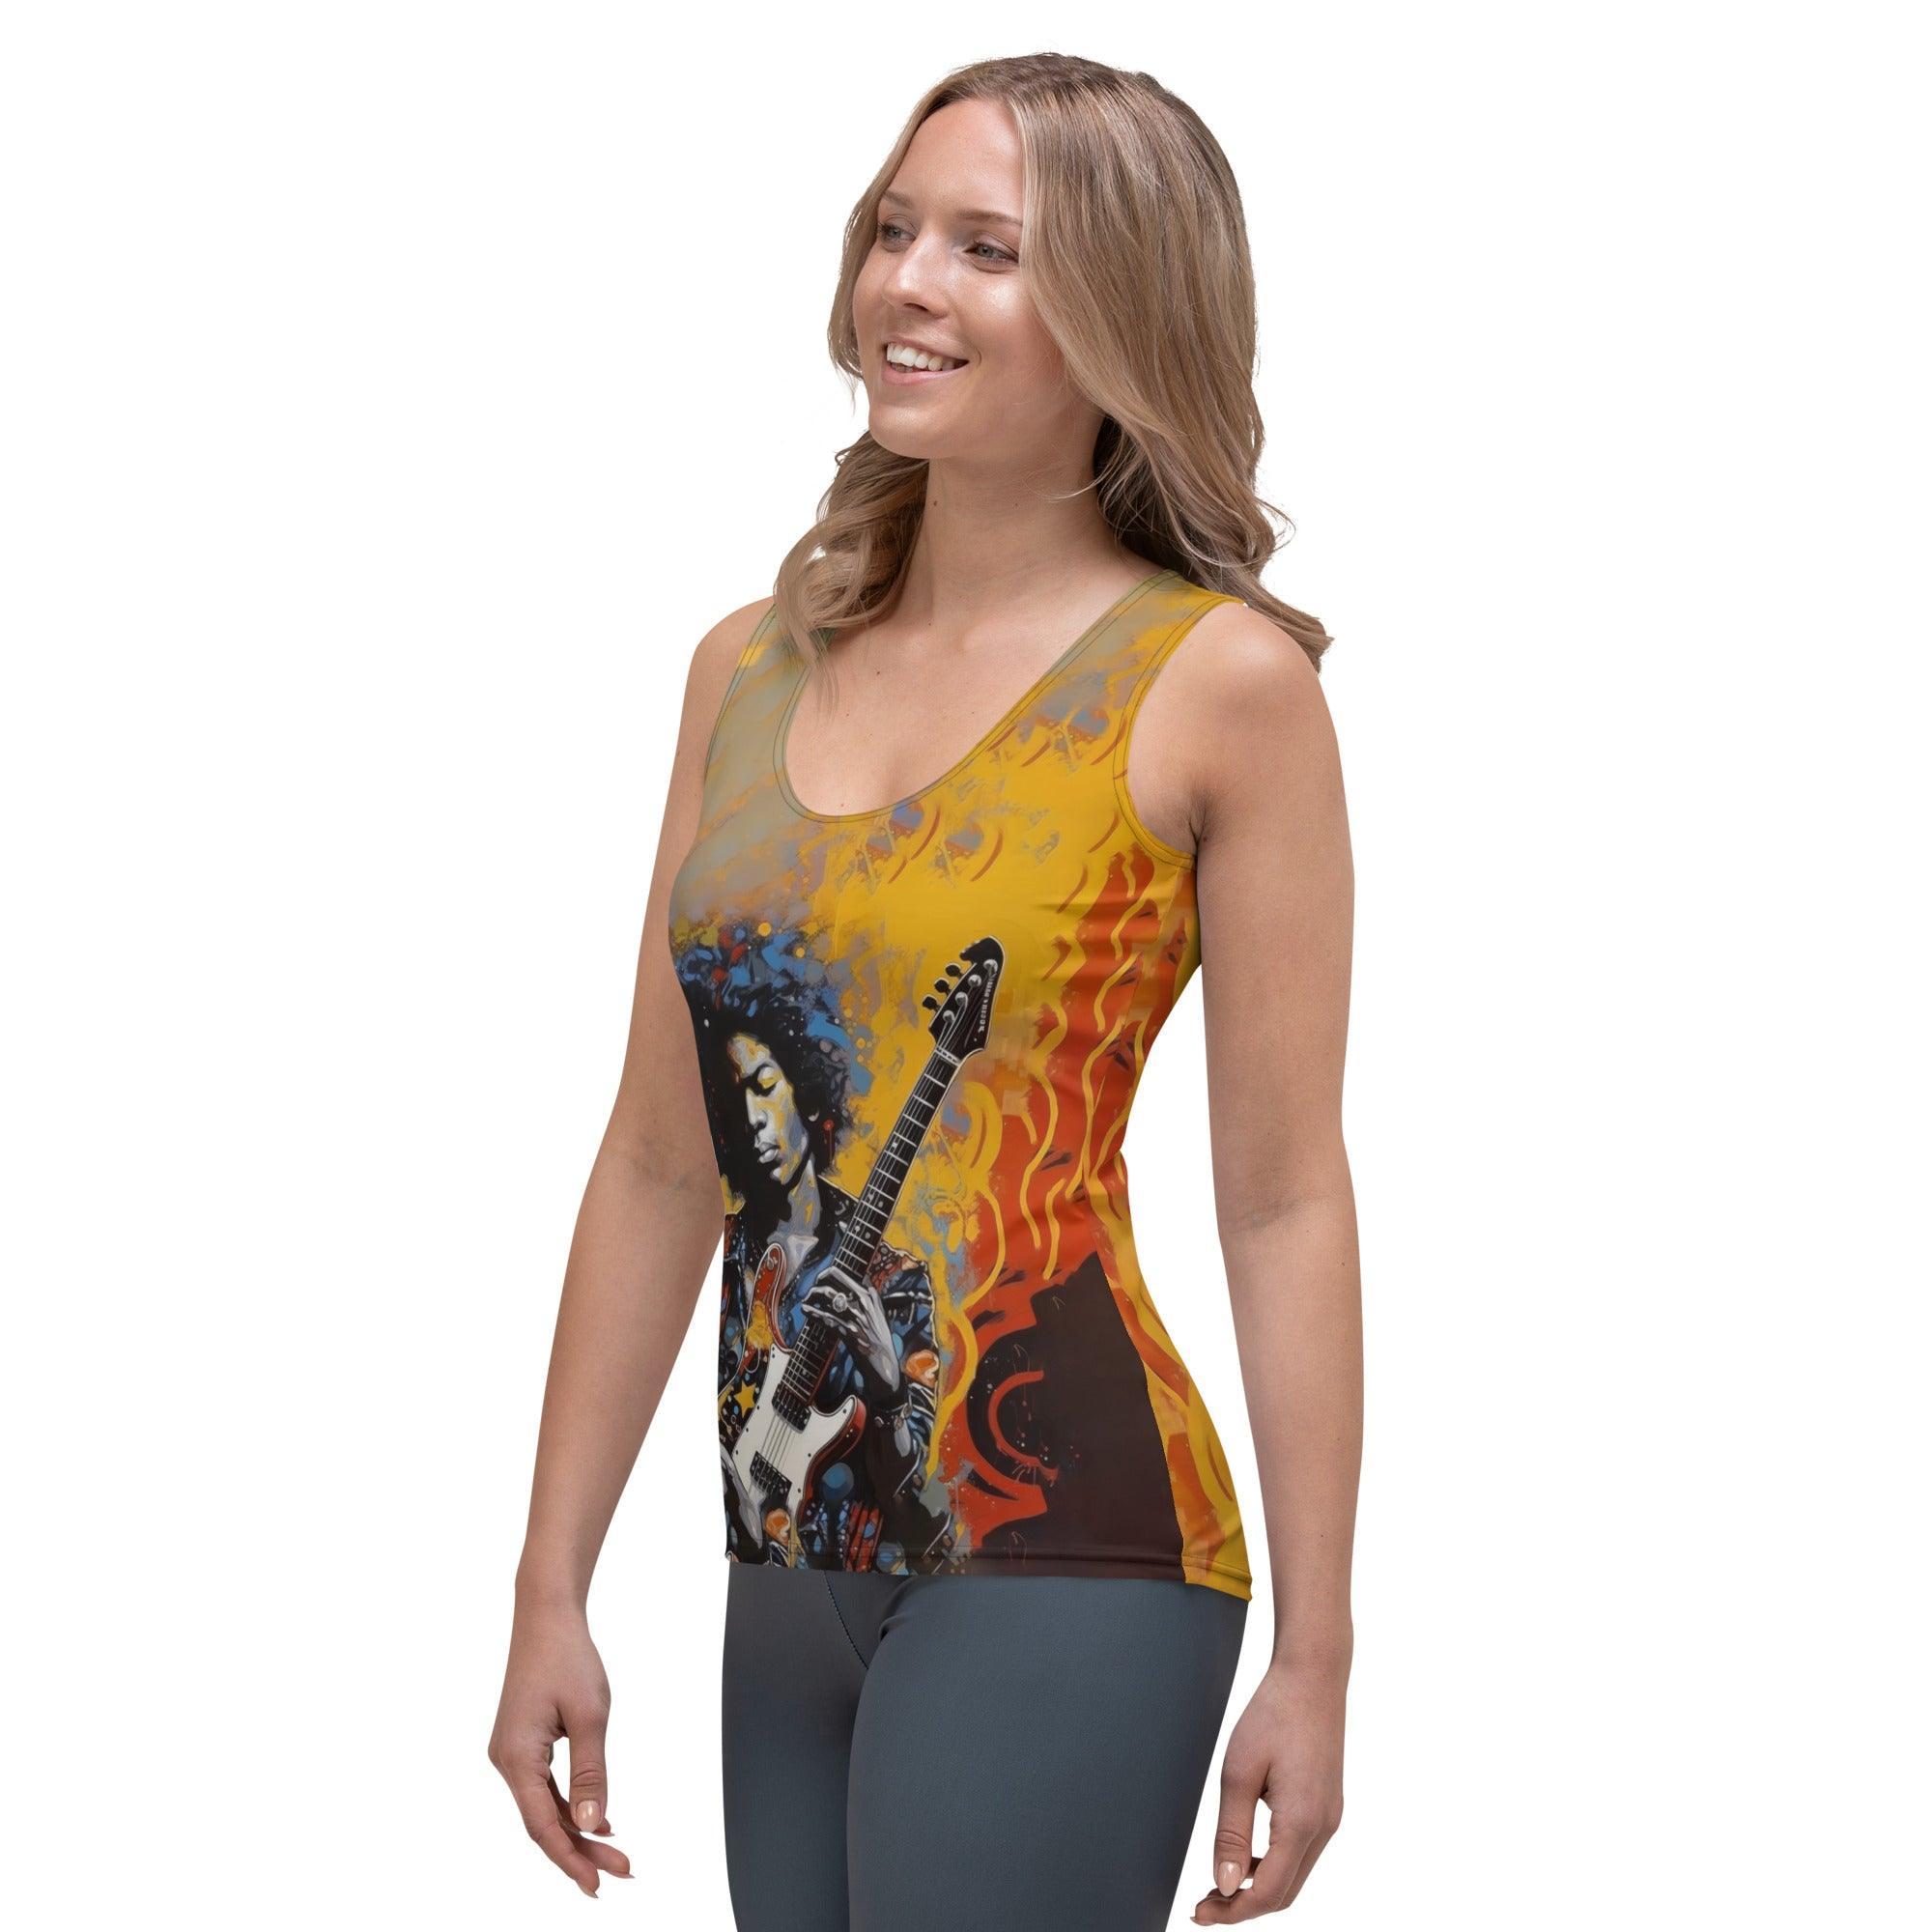 Melodies-Inspire-Dreams-Sublimation-Cut-Sew-Tank-Top-Side-View